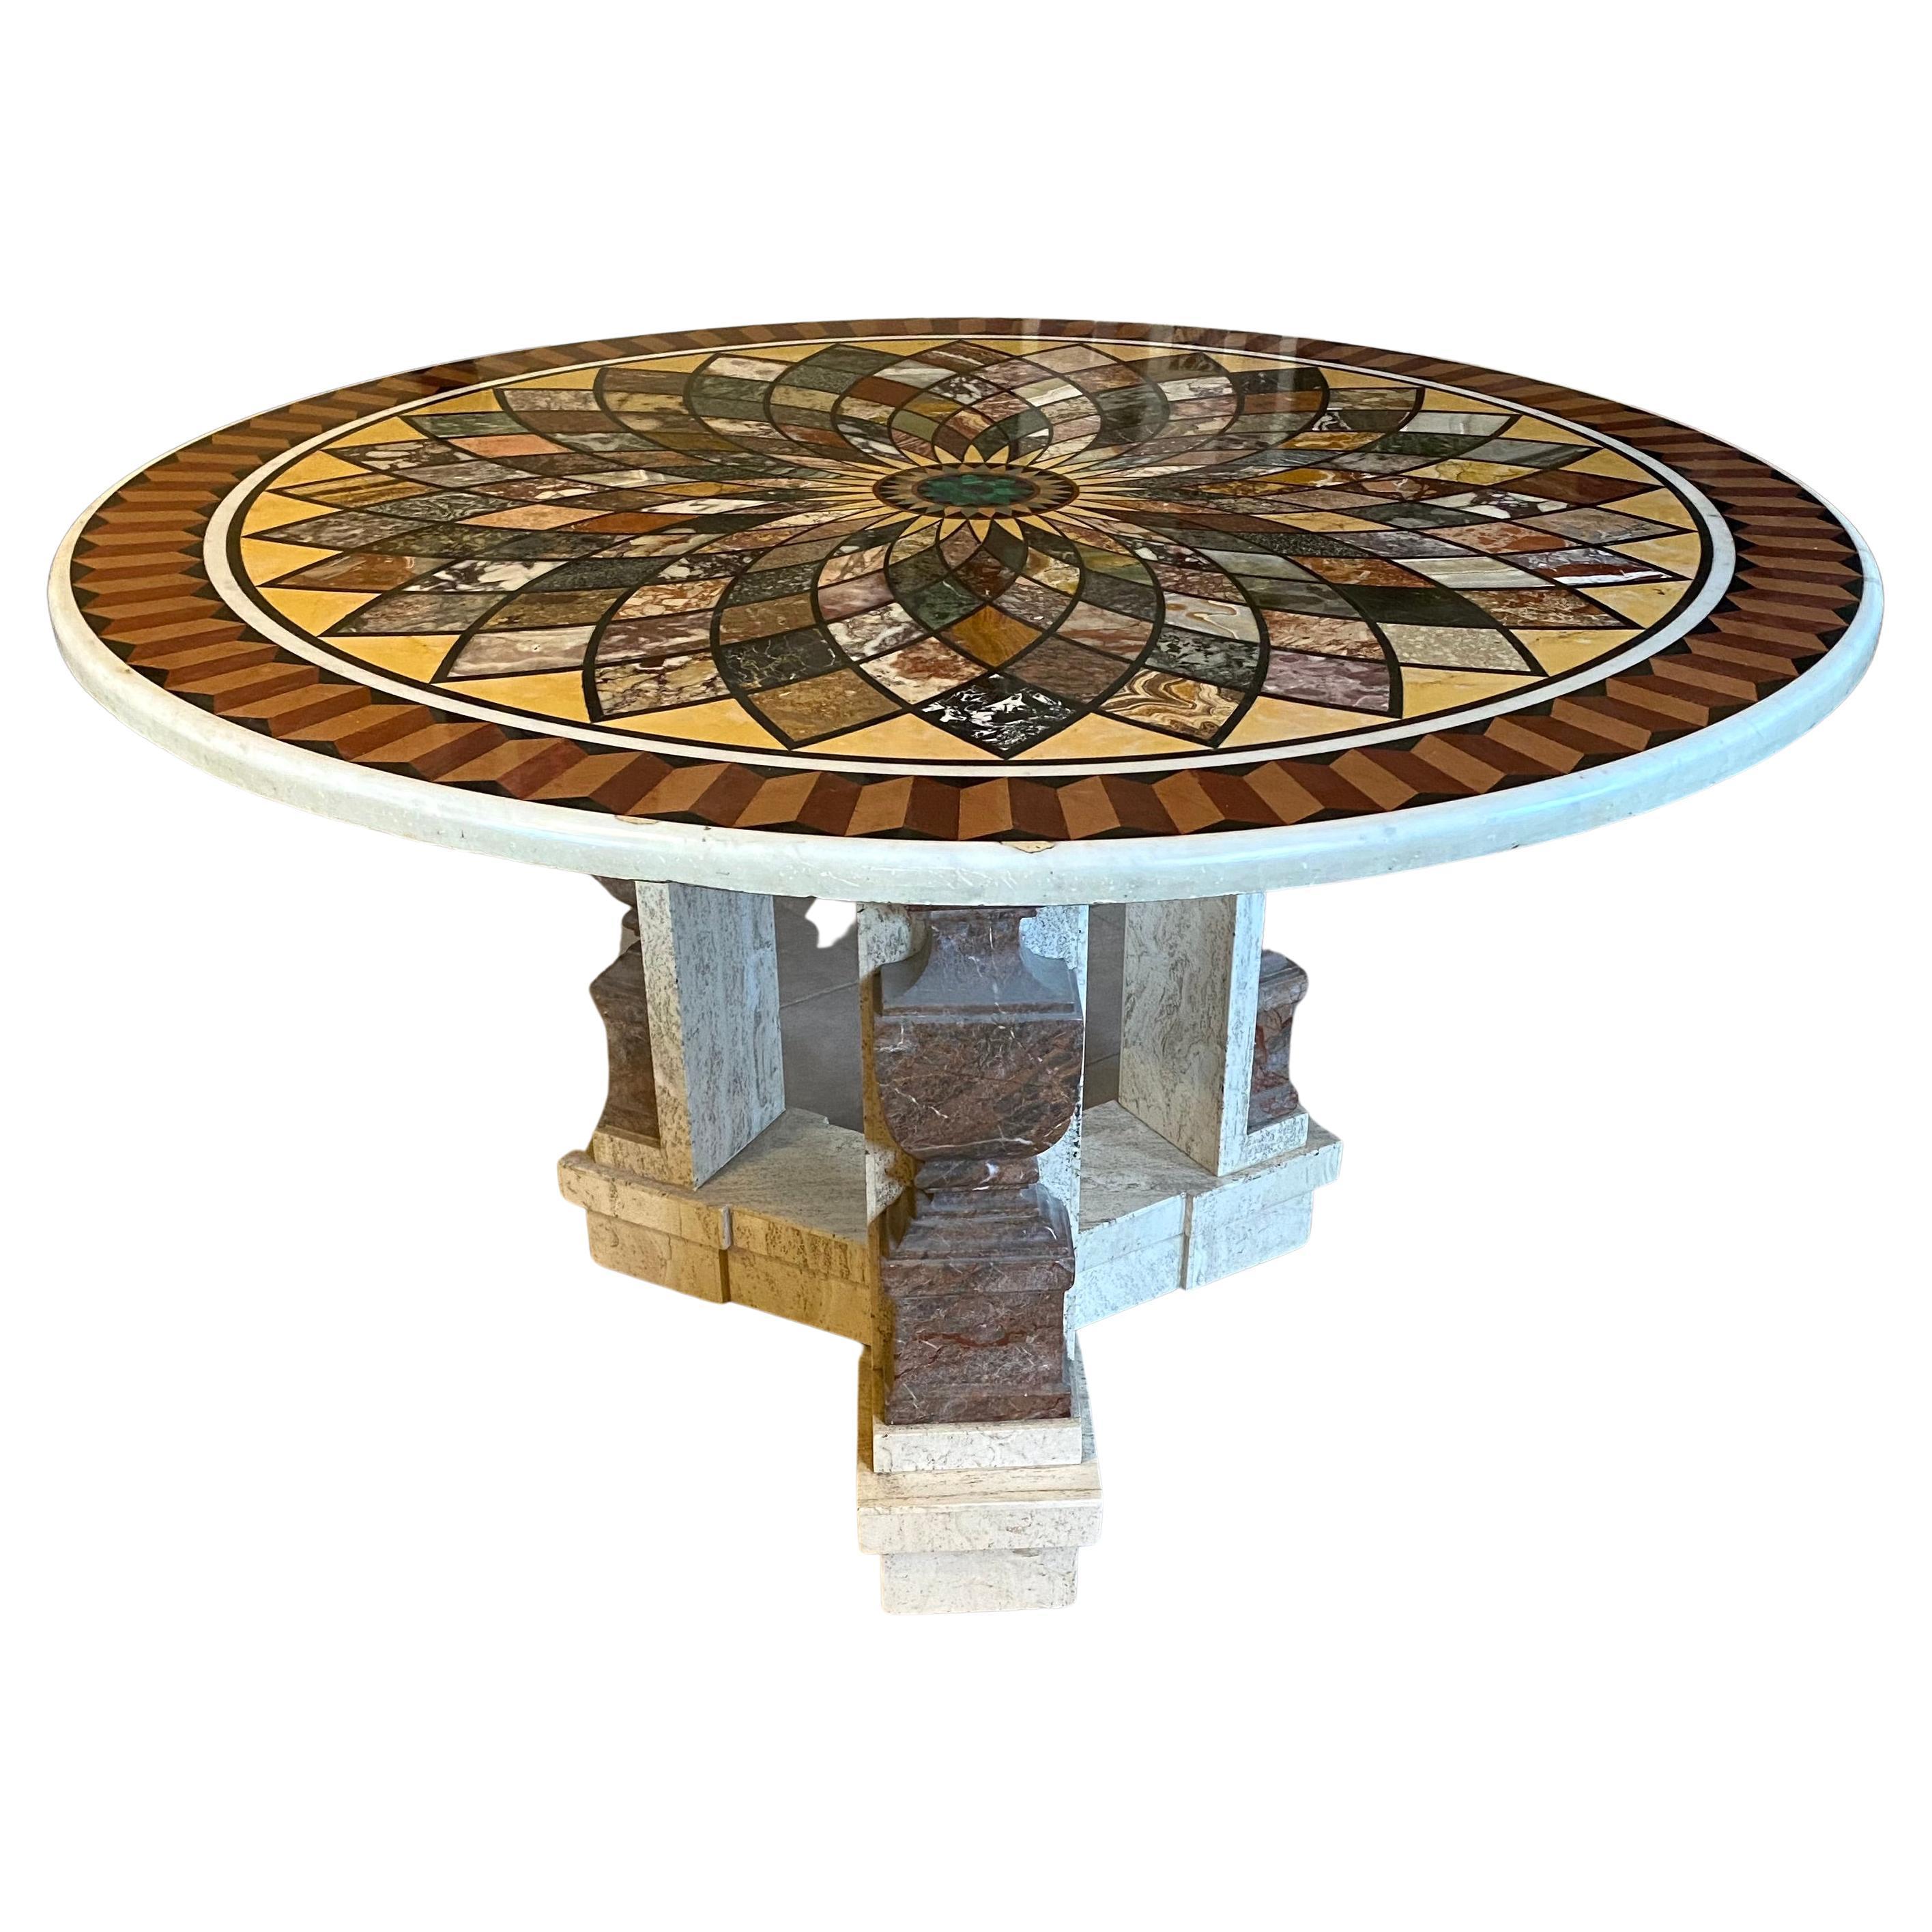 Neoclassical Exceptional 19th Century Italian Pietra Dura Marble Centre Table For Sale